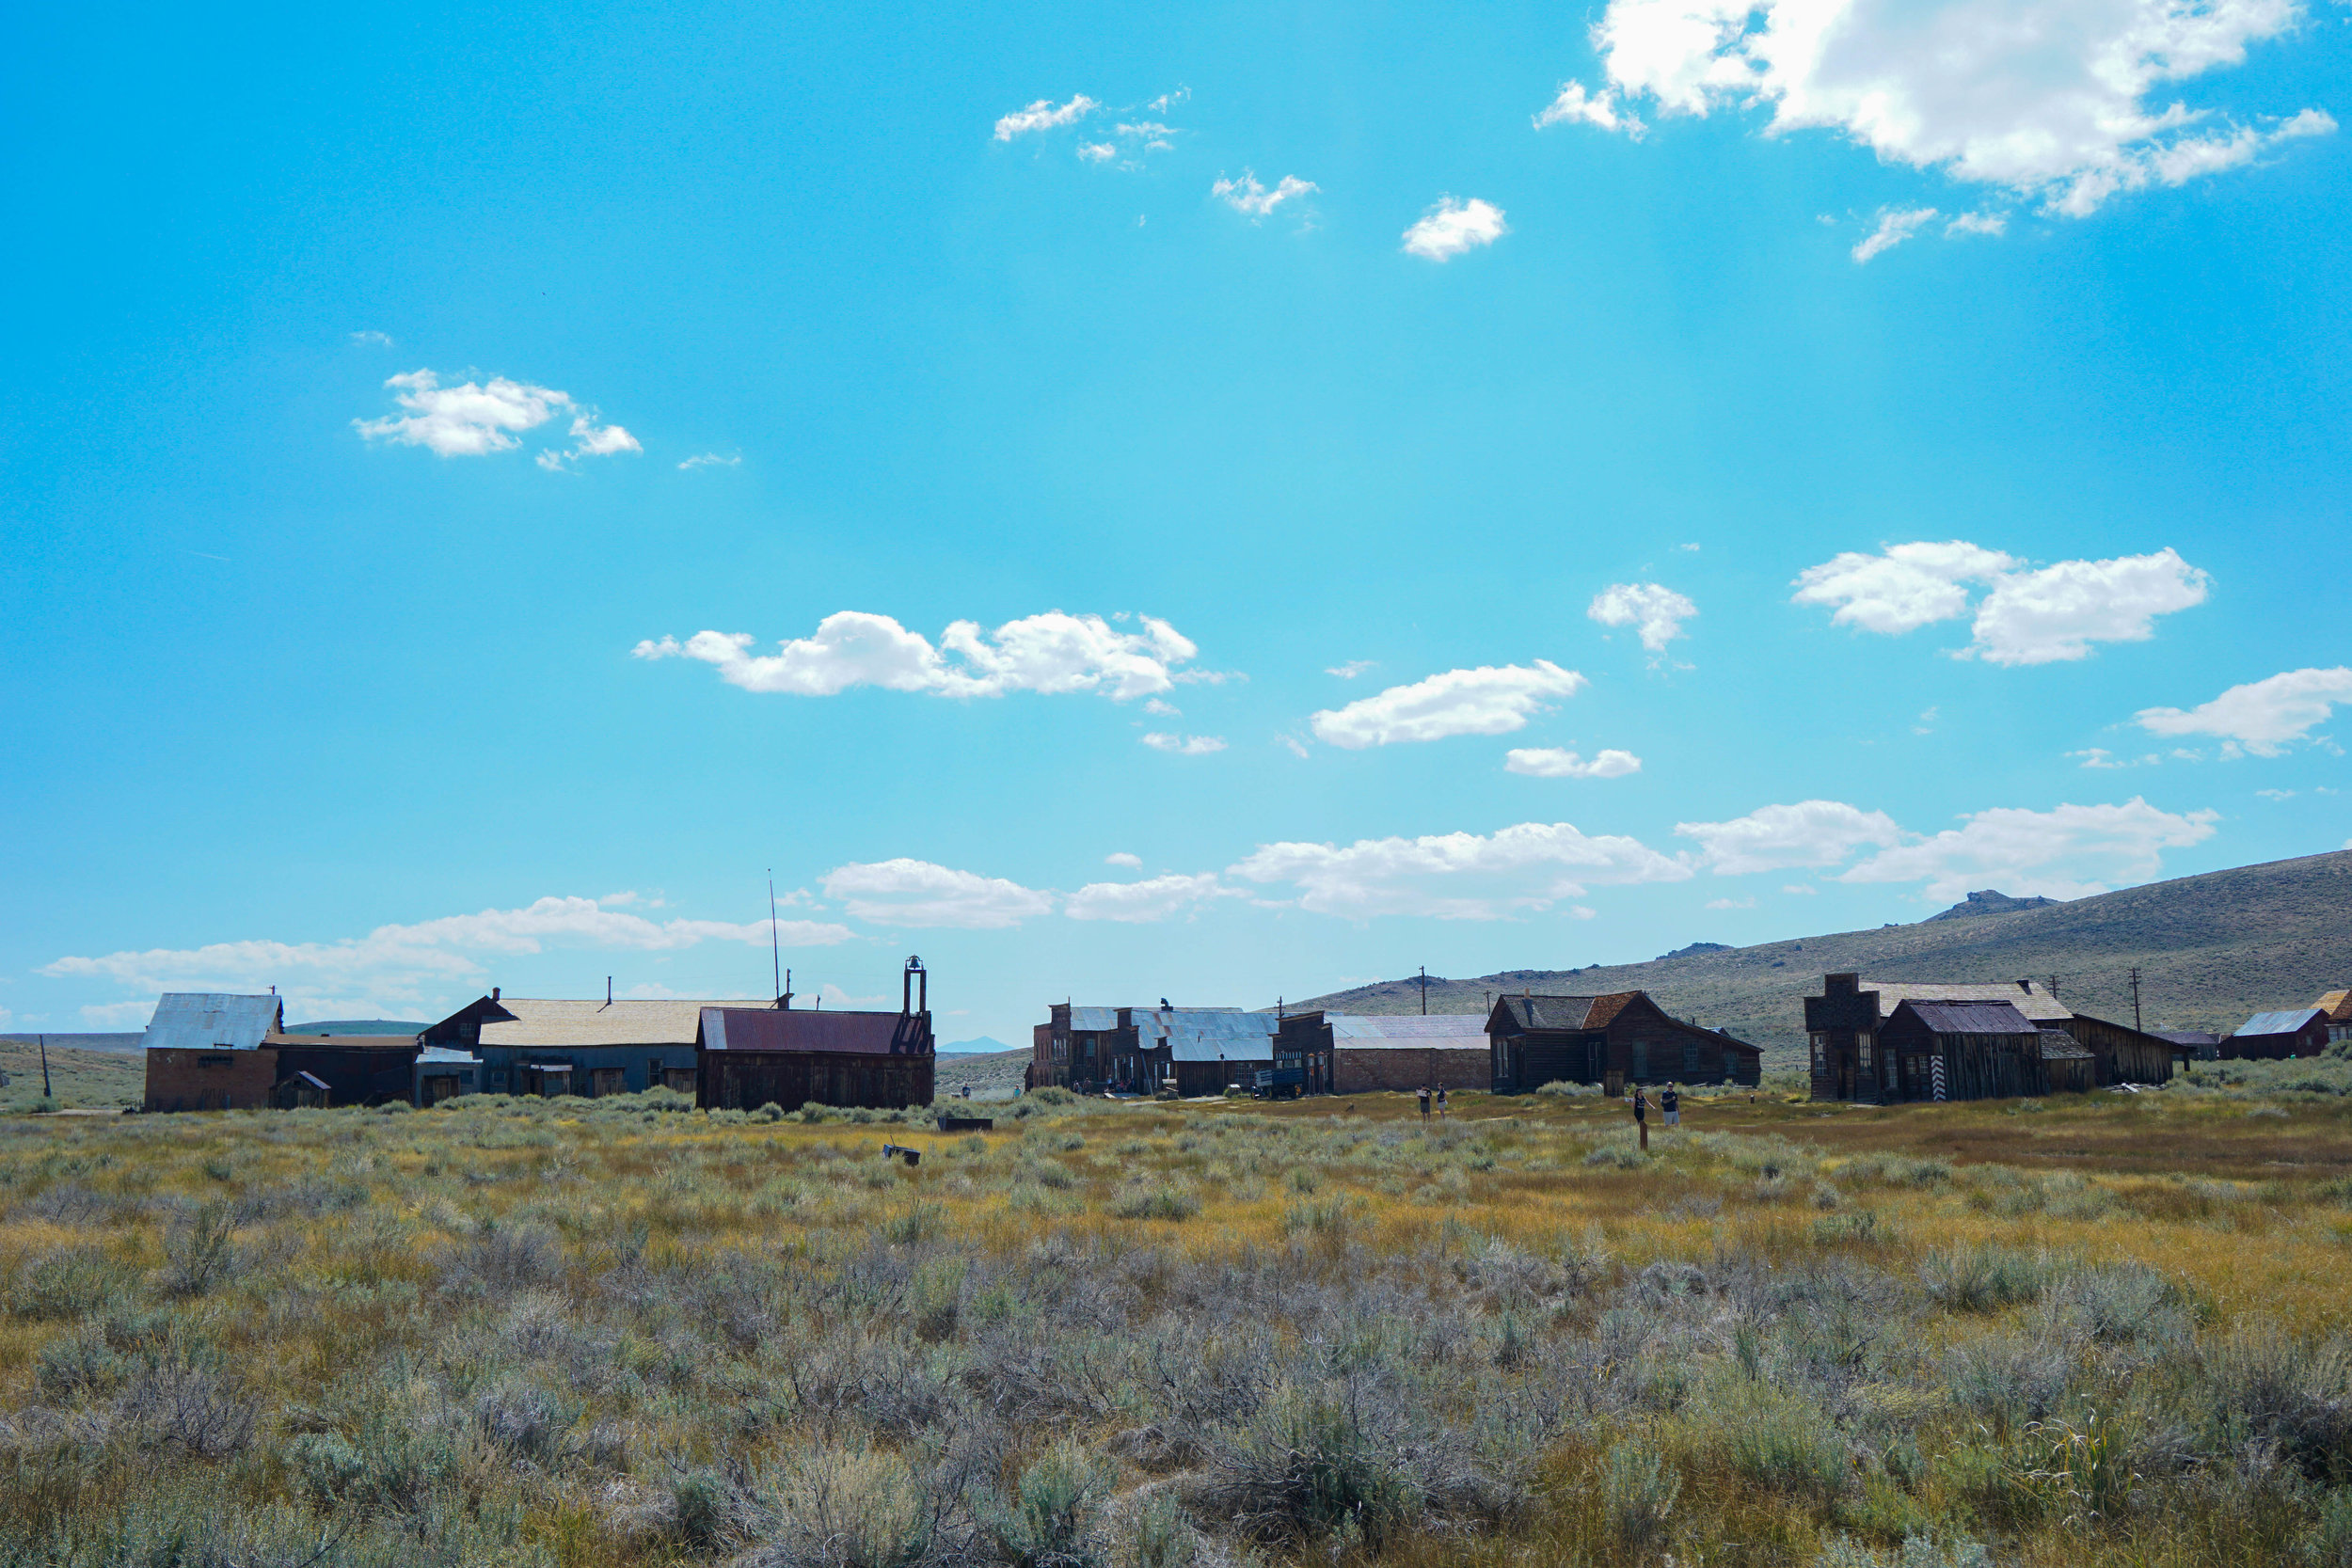 Bodie was a town known for bad men & violence. It had more saloons than churches, & more murders than births.